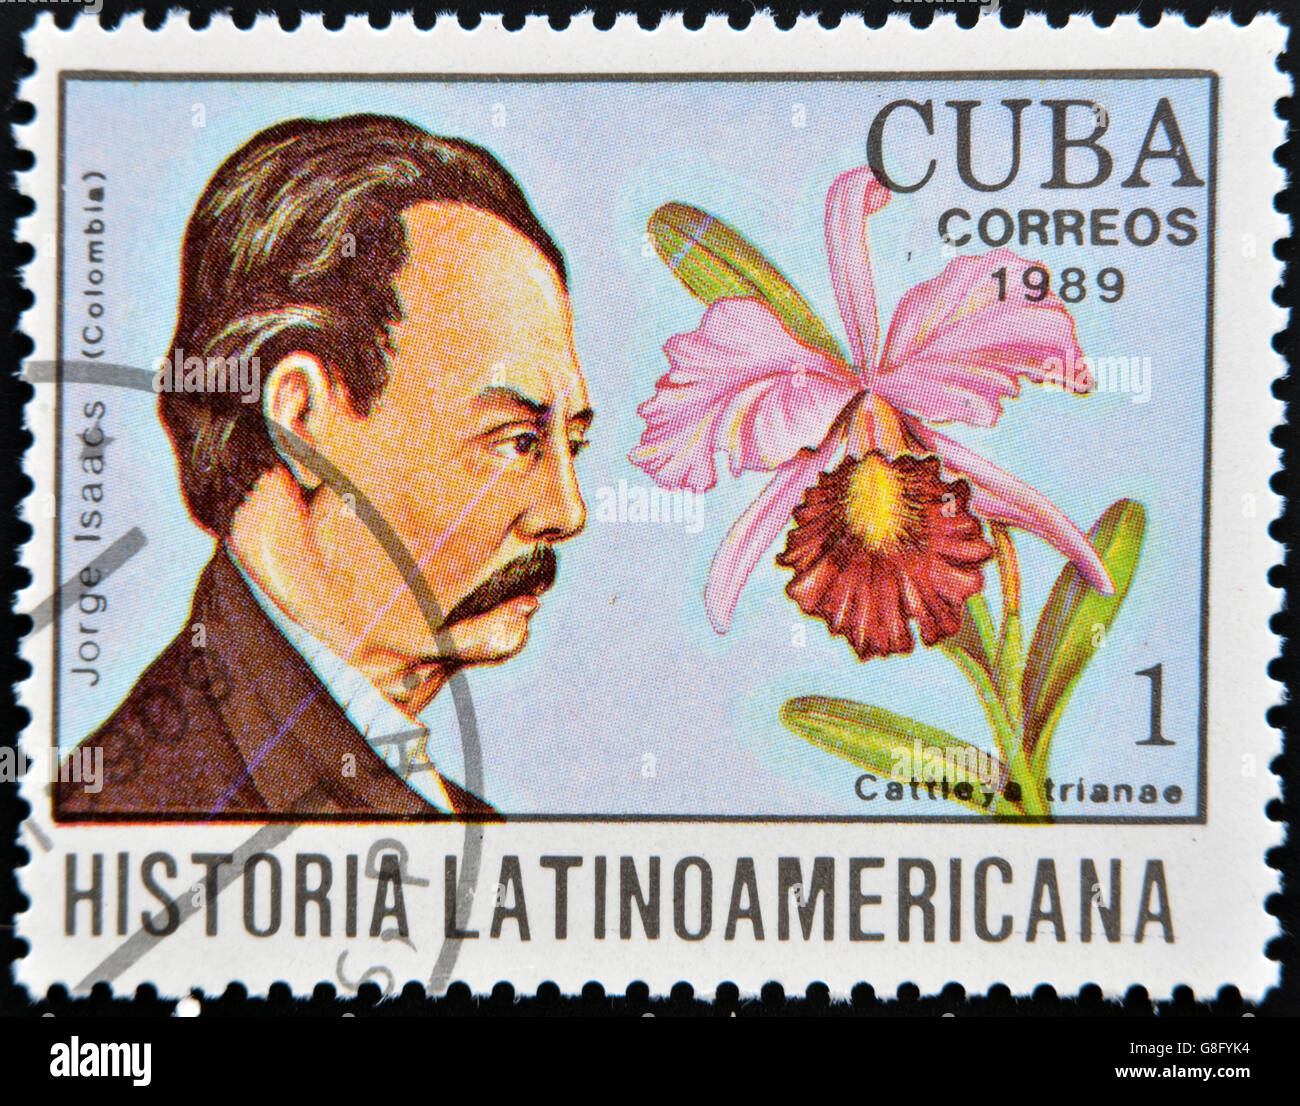 CUBA - CIRCA 1989: A stamp printed in CUBA dedicated to Latin American history shows a Cattleya trianae and Jorge Isaacs, circa Stock Photo